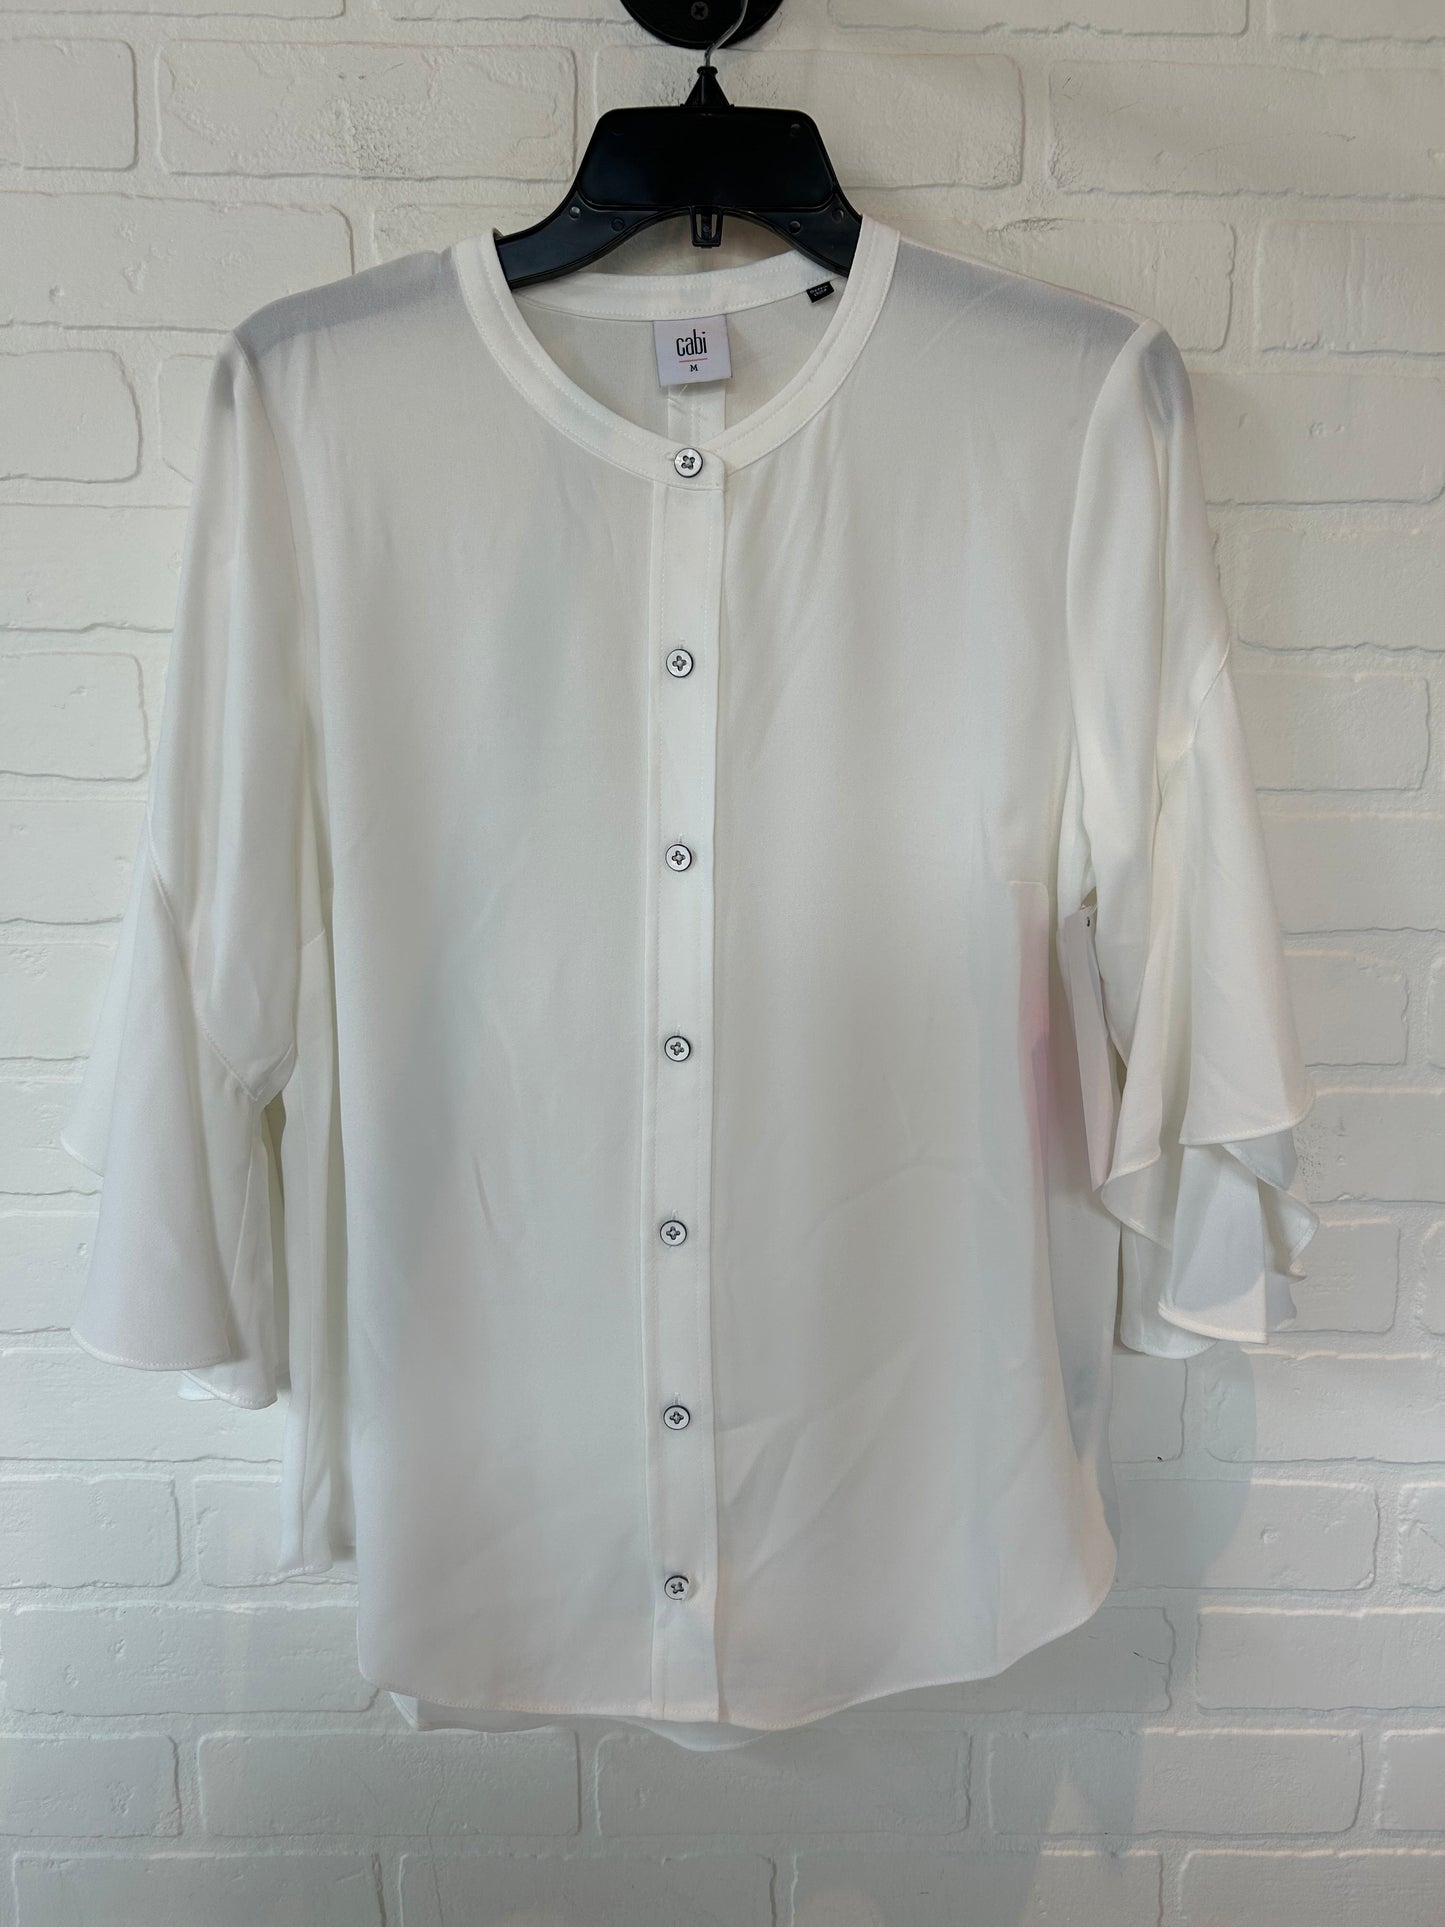 White Top Short Sleeve Cabi, Size M